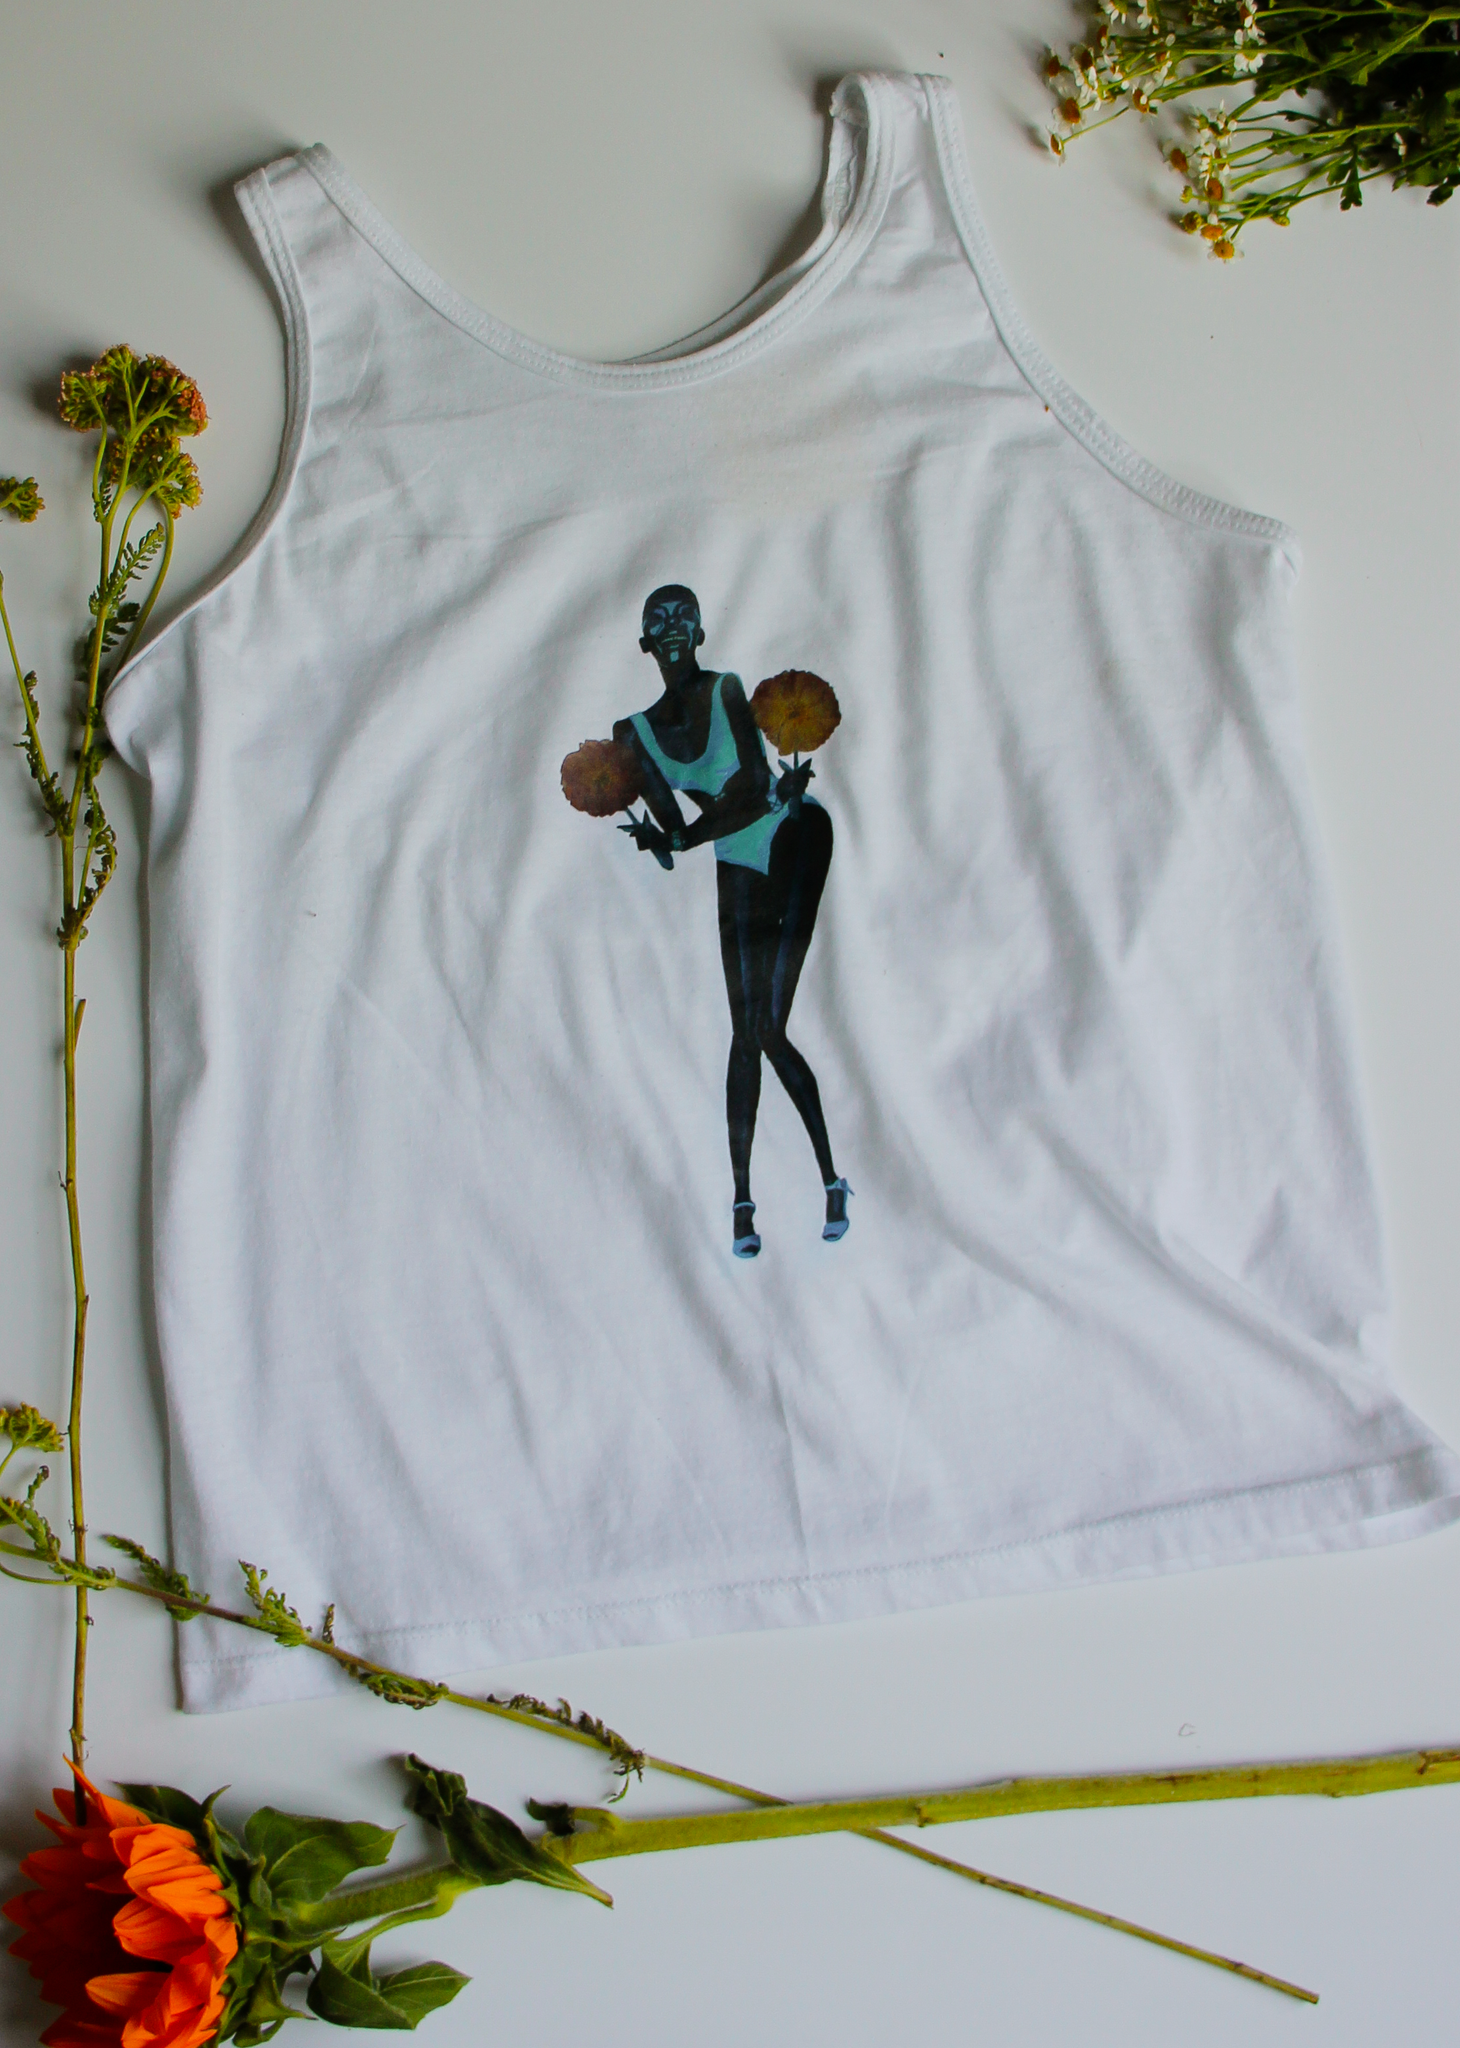 A white upcycled tank top with an illustration of model Adut Akech on it